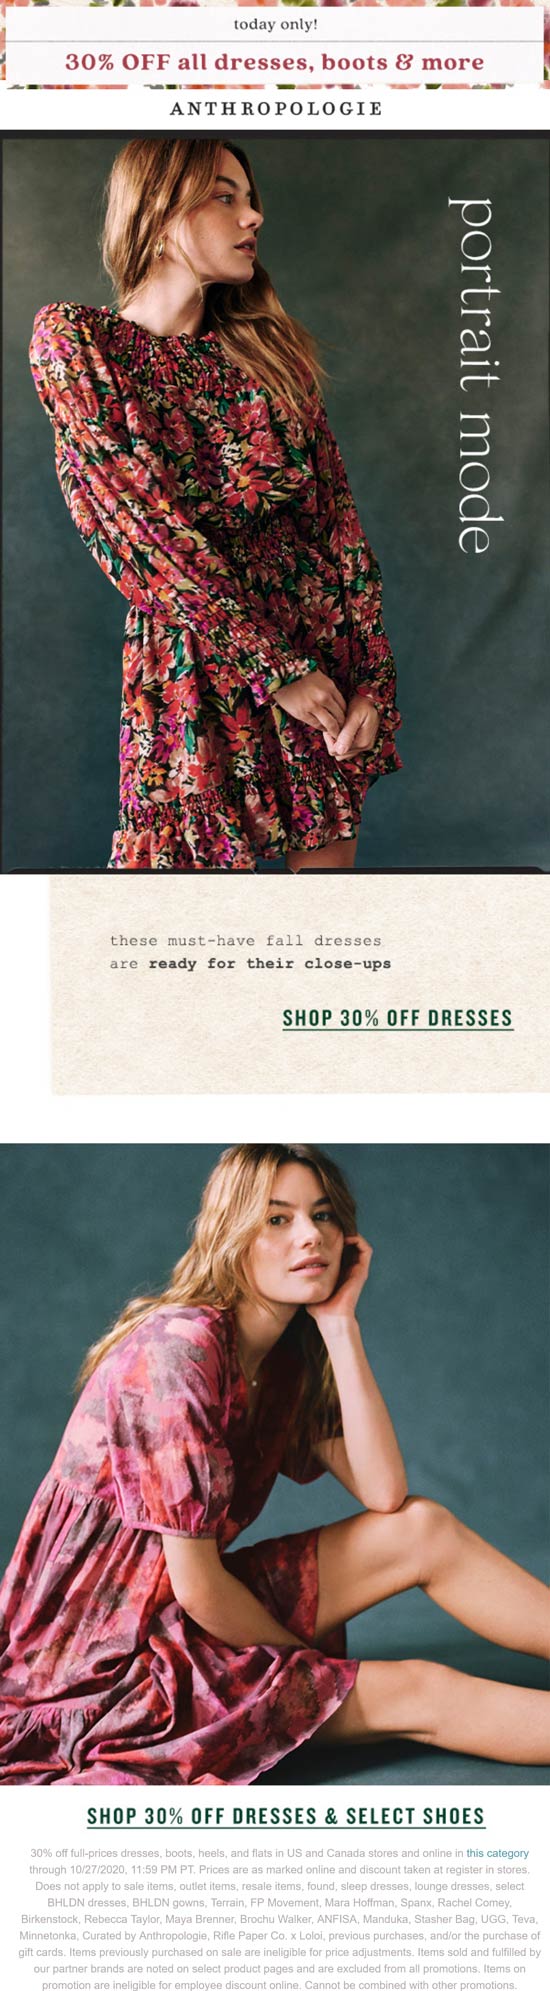 30 off Fall today at Anthropologie, ditto online anthropologie The